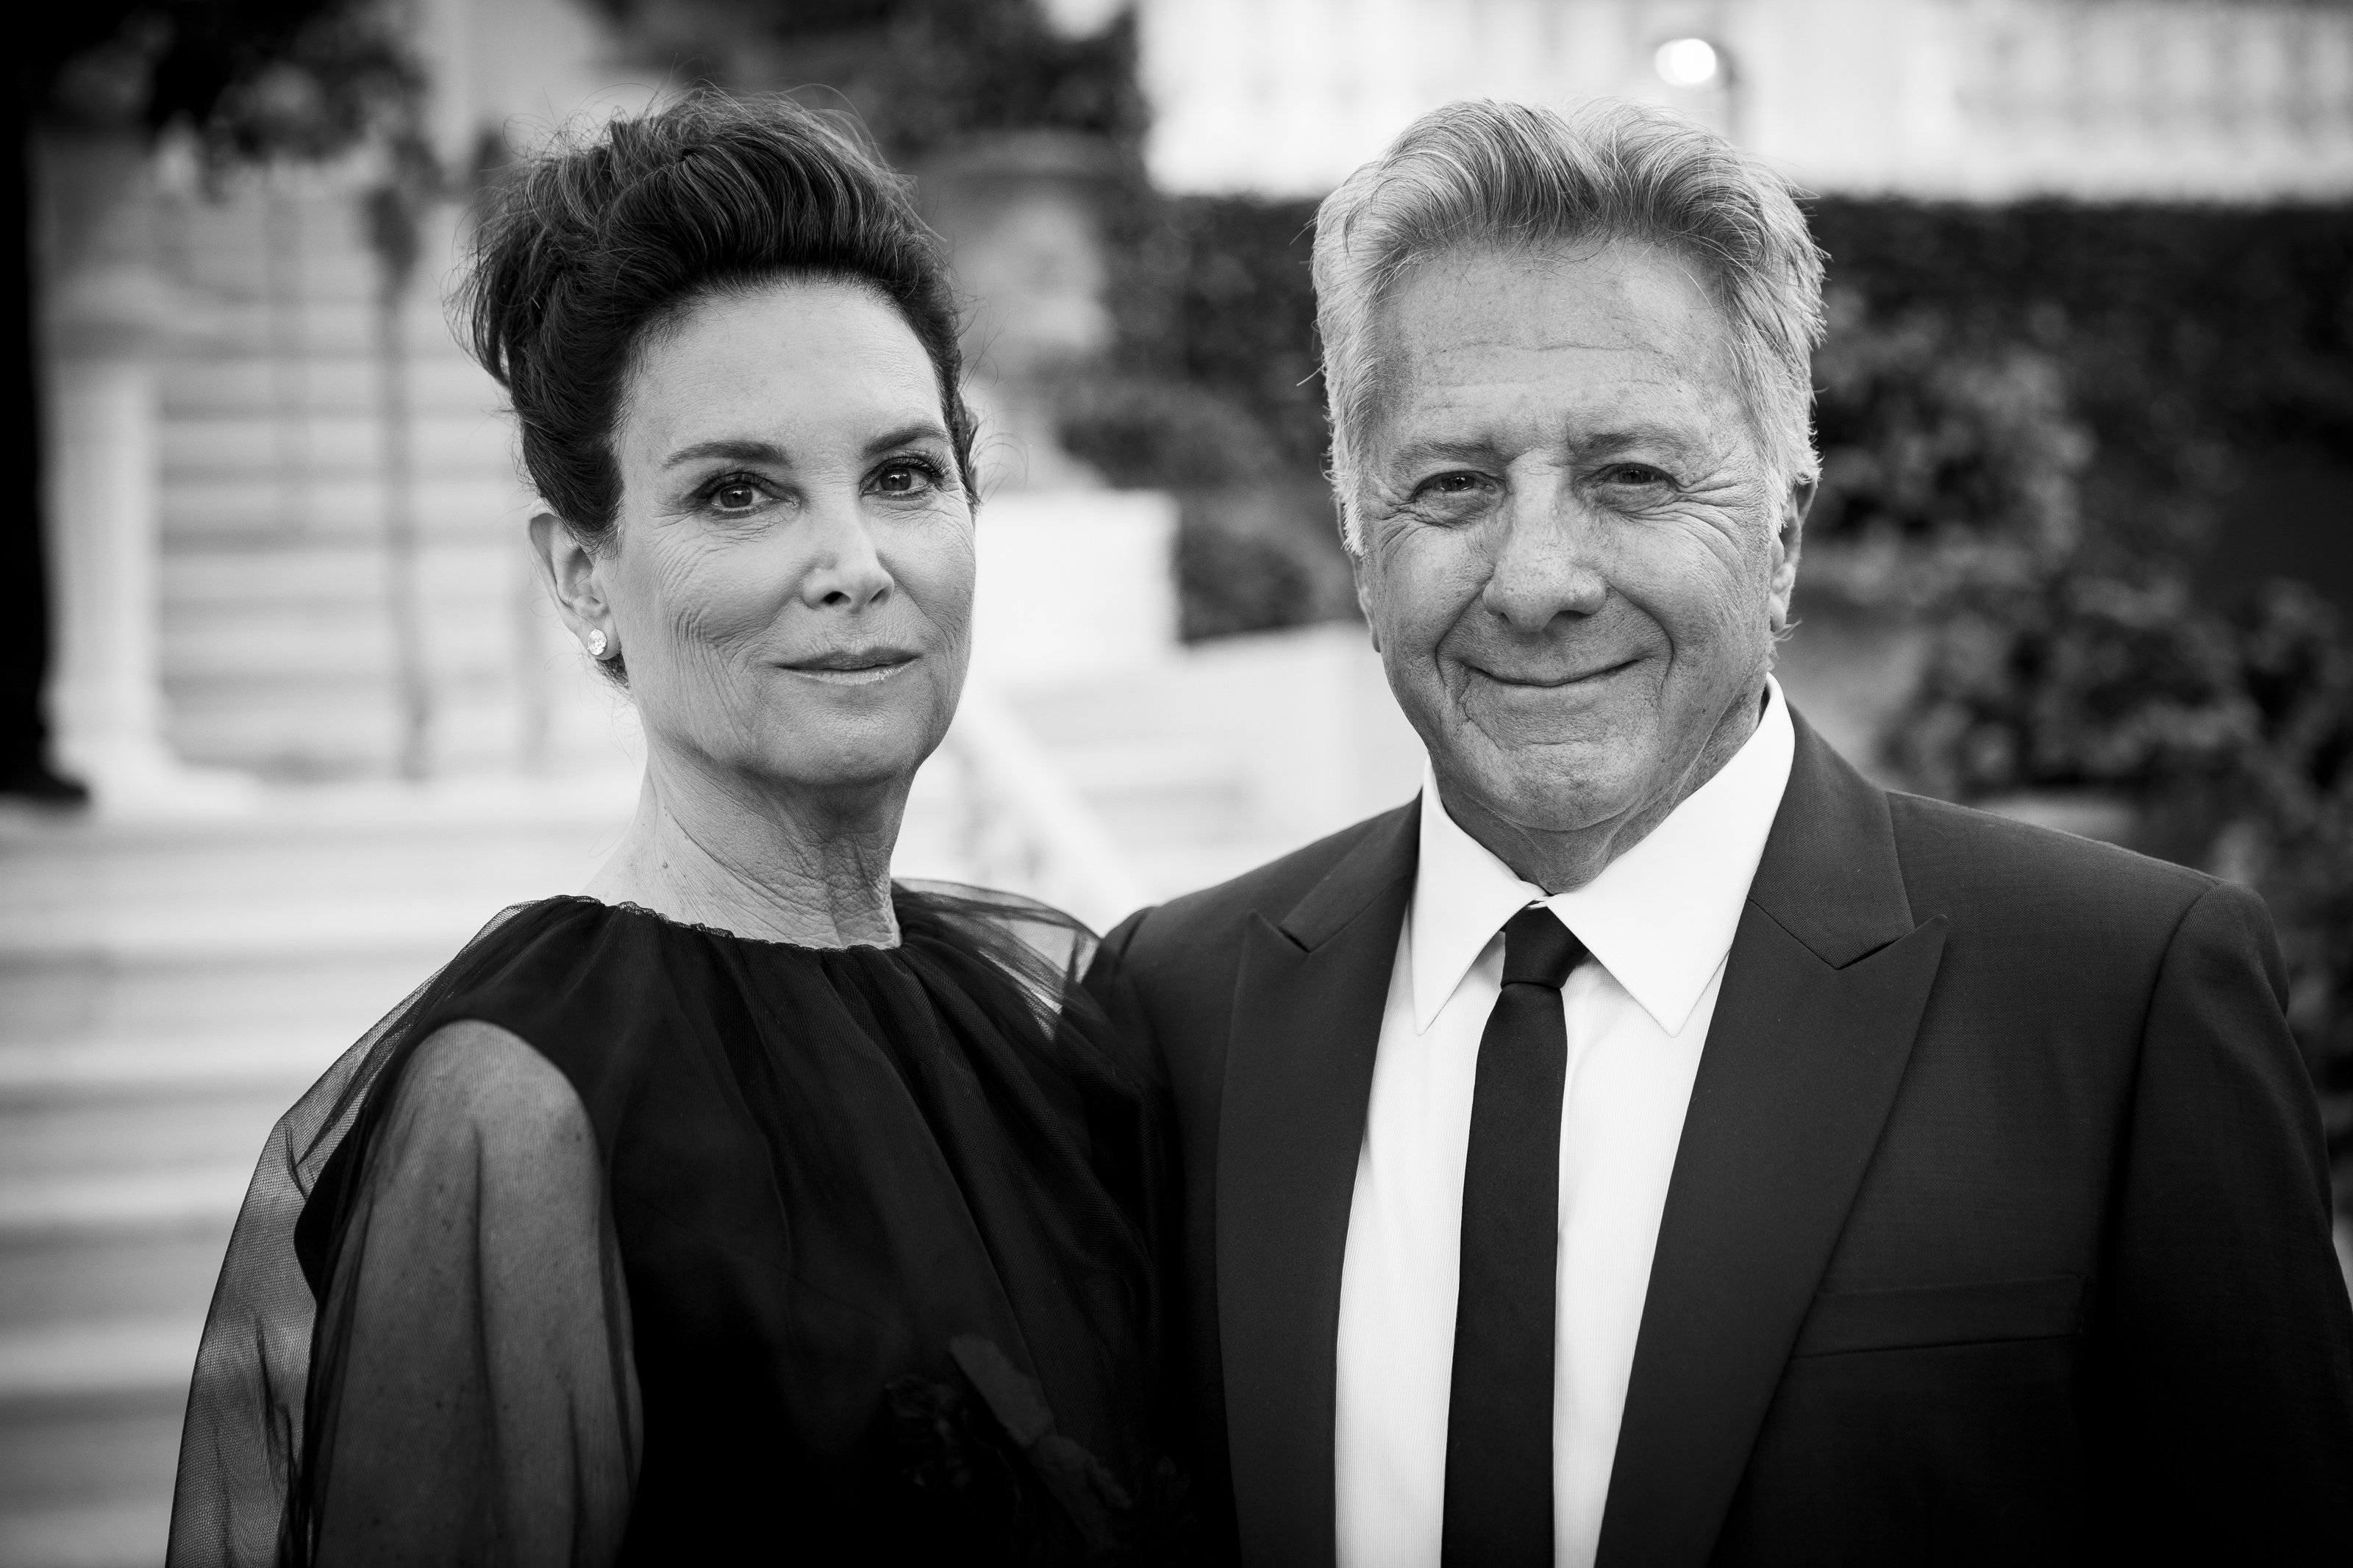  Lisa Hoffman and Dustin Hoffman arrive at the amfAR Gala Cannes 2017 at Hotel du Cap-Eden-Roc on May 25, 2017 in Cap d'Antibes, France. | Source: Getty Images